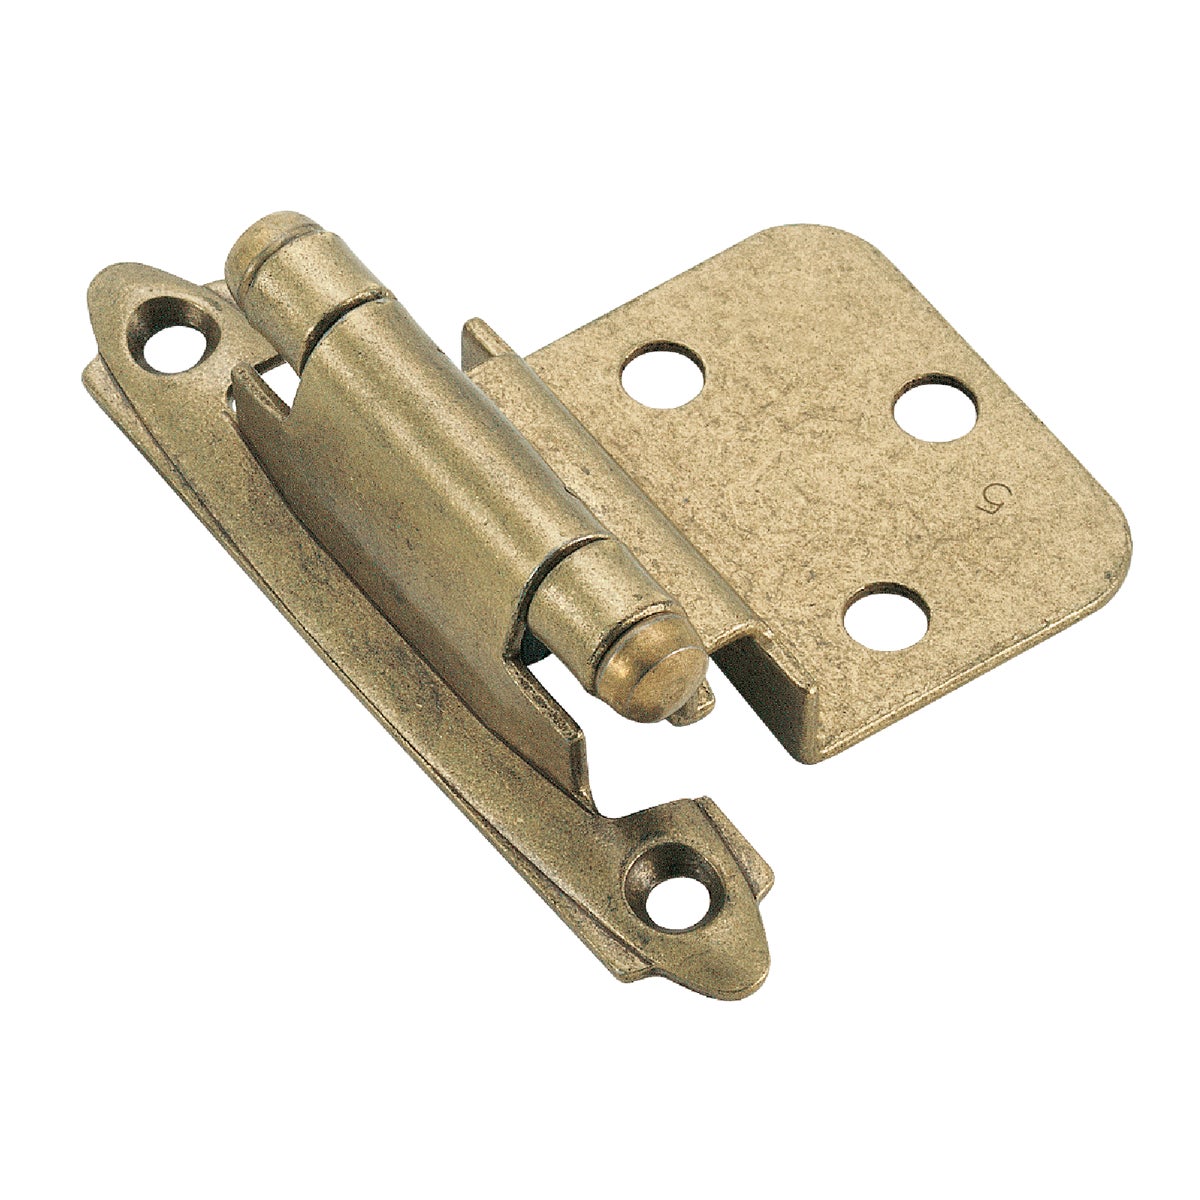 Item 238308, Inset surface mount cabinet door hinge with 105 degree opening angle and 